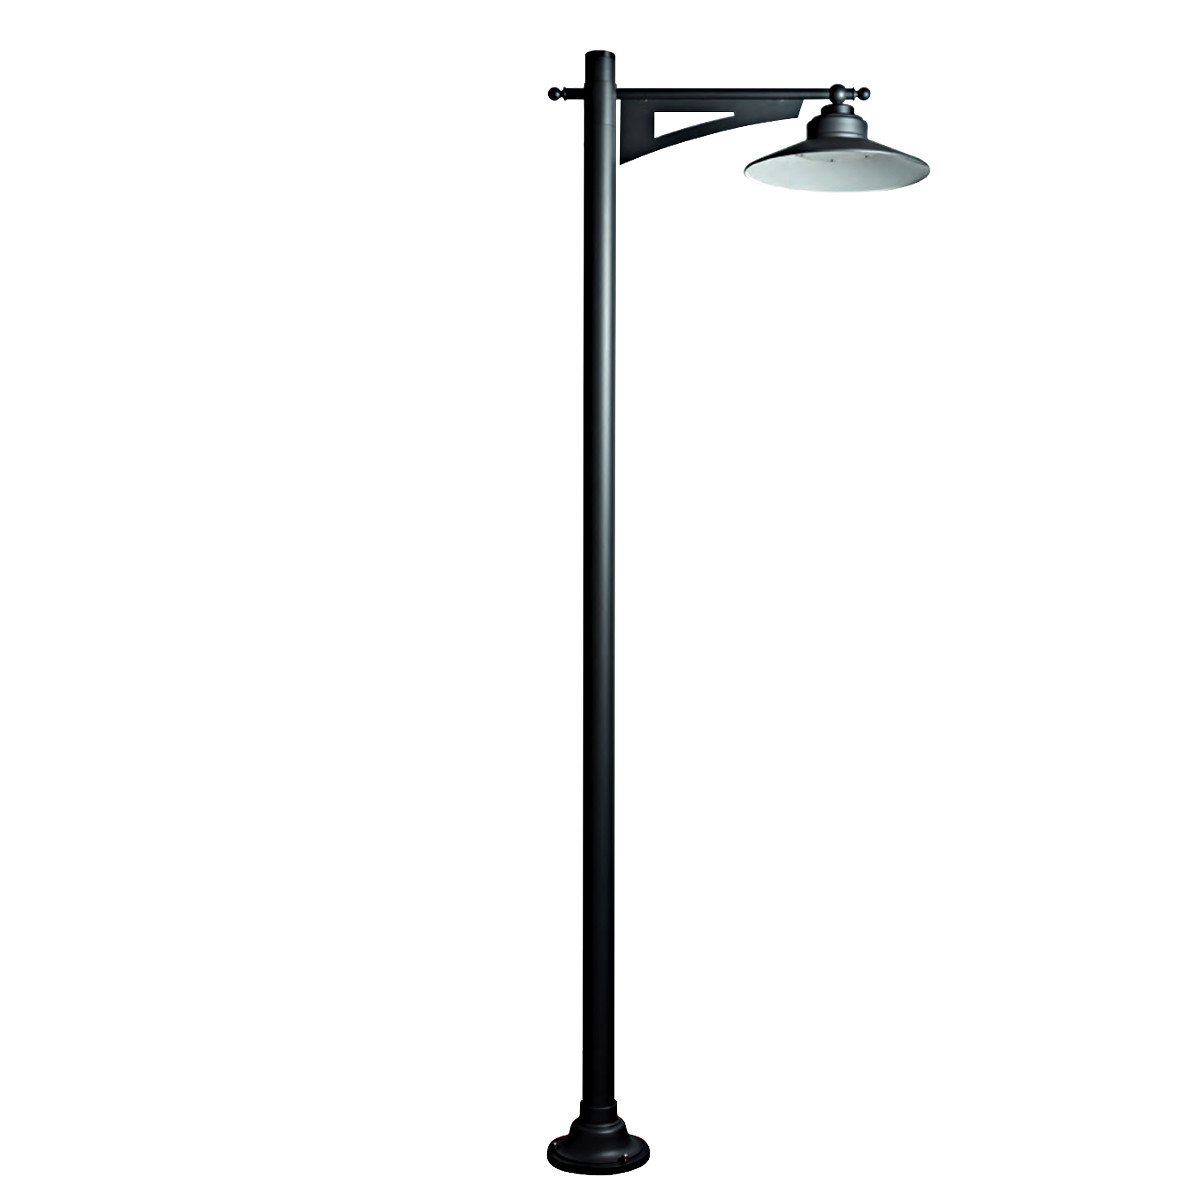 Factory-style Lamp Post IP 65